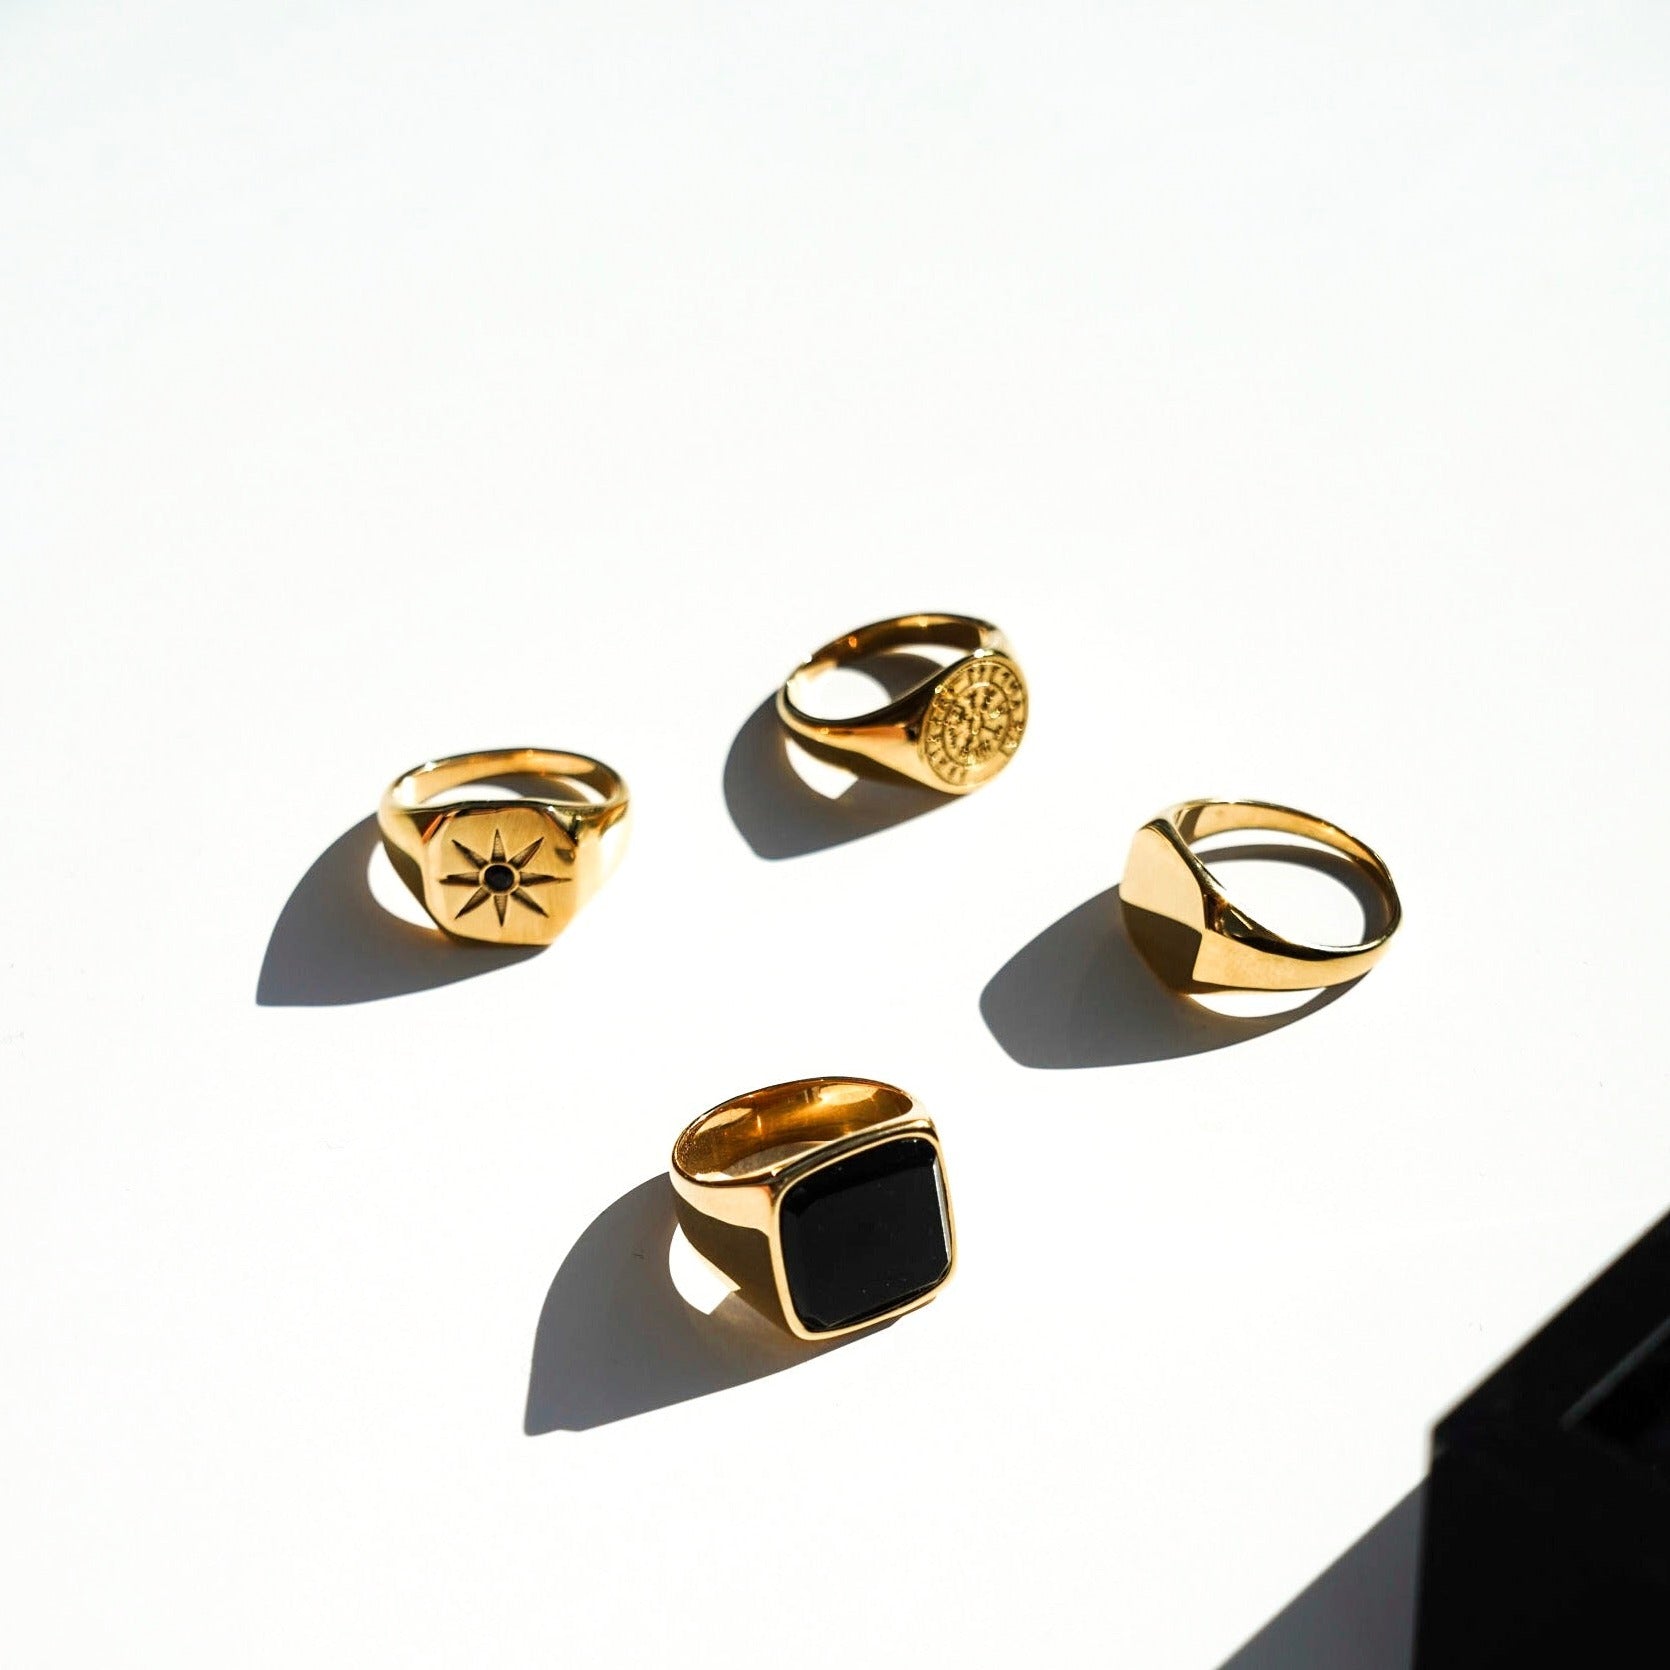 North Star Signature - Gold-toned ring